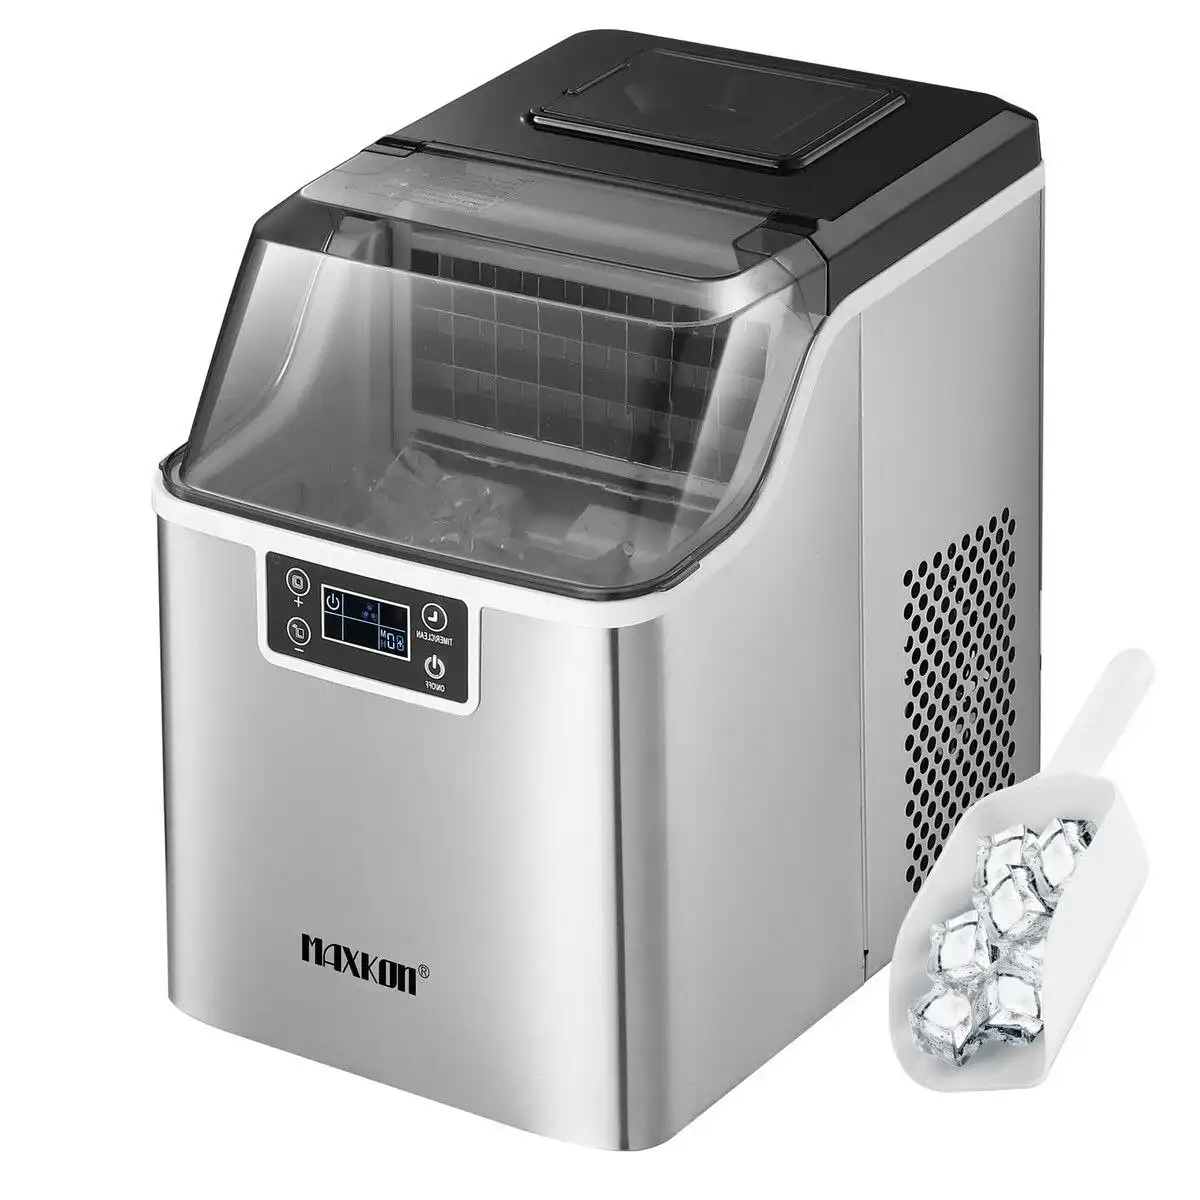 Maxkon 20kg Ice Maker Machine Clear Cube Making Countertop Home Commercial 2 Water Filling Methods Stainless Steel